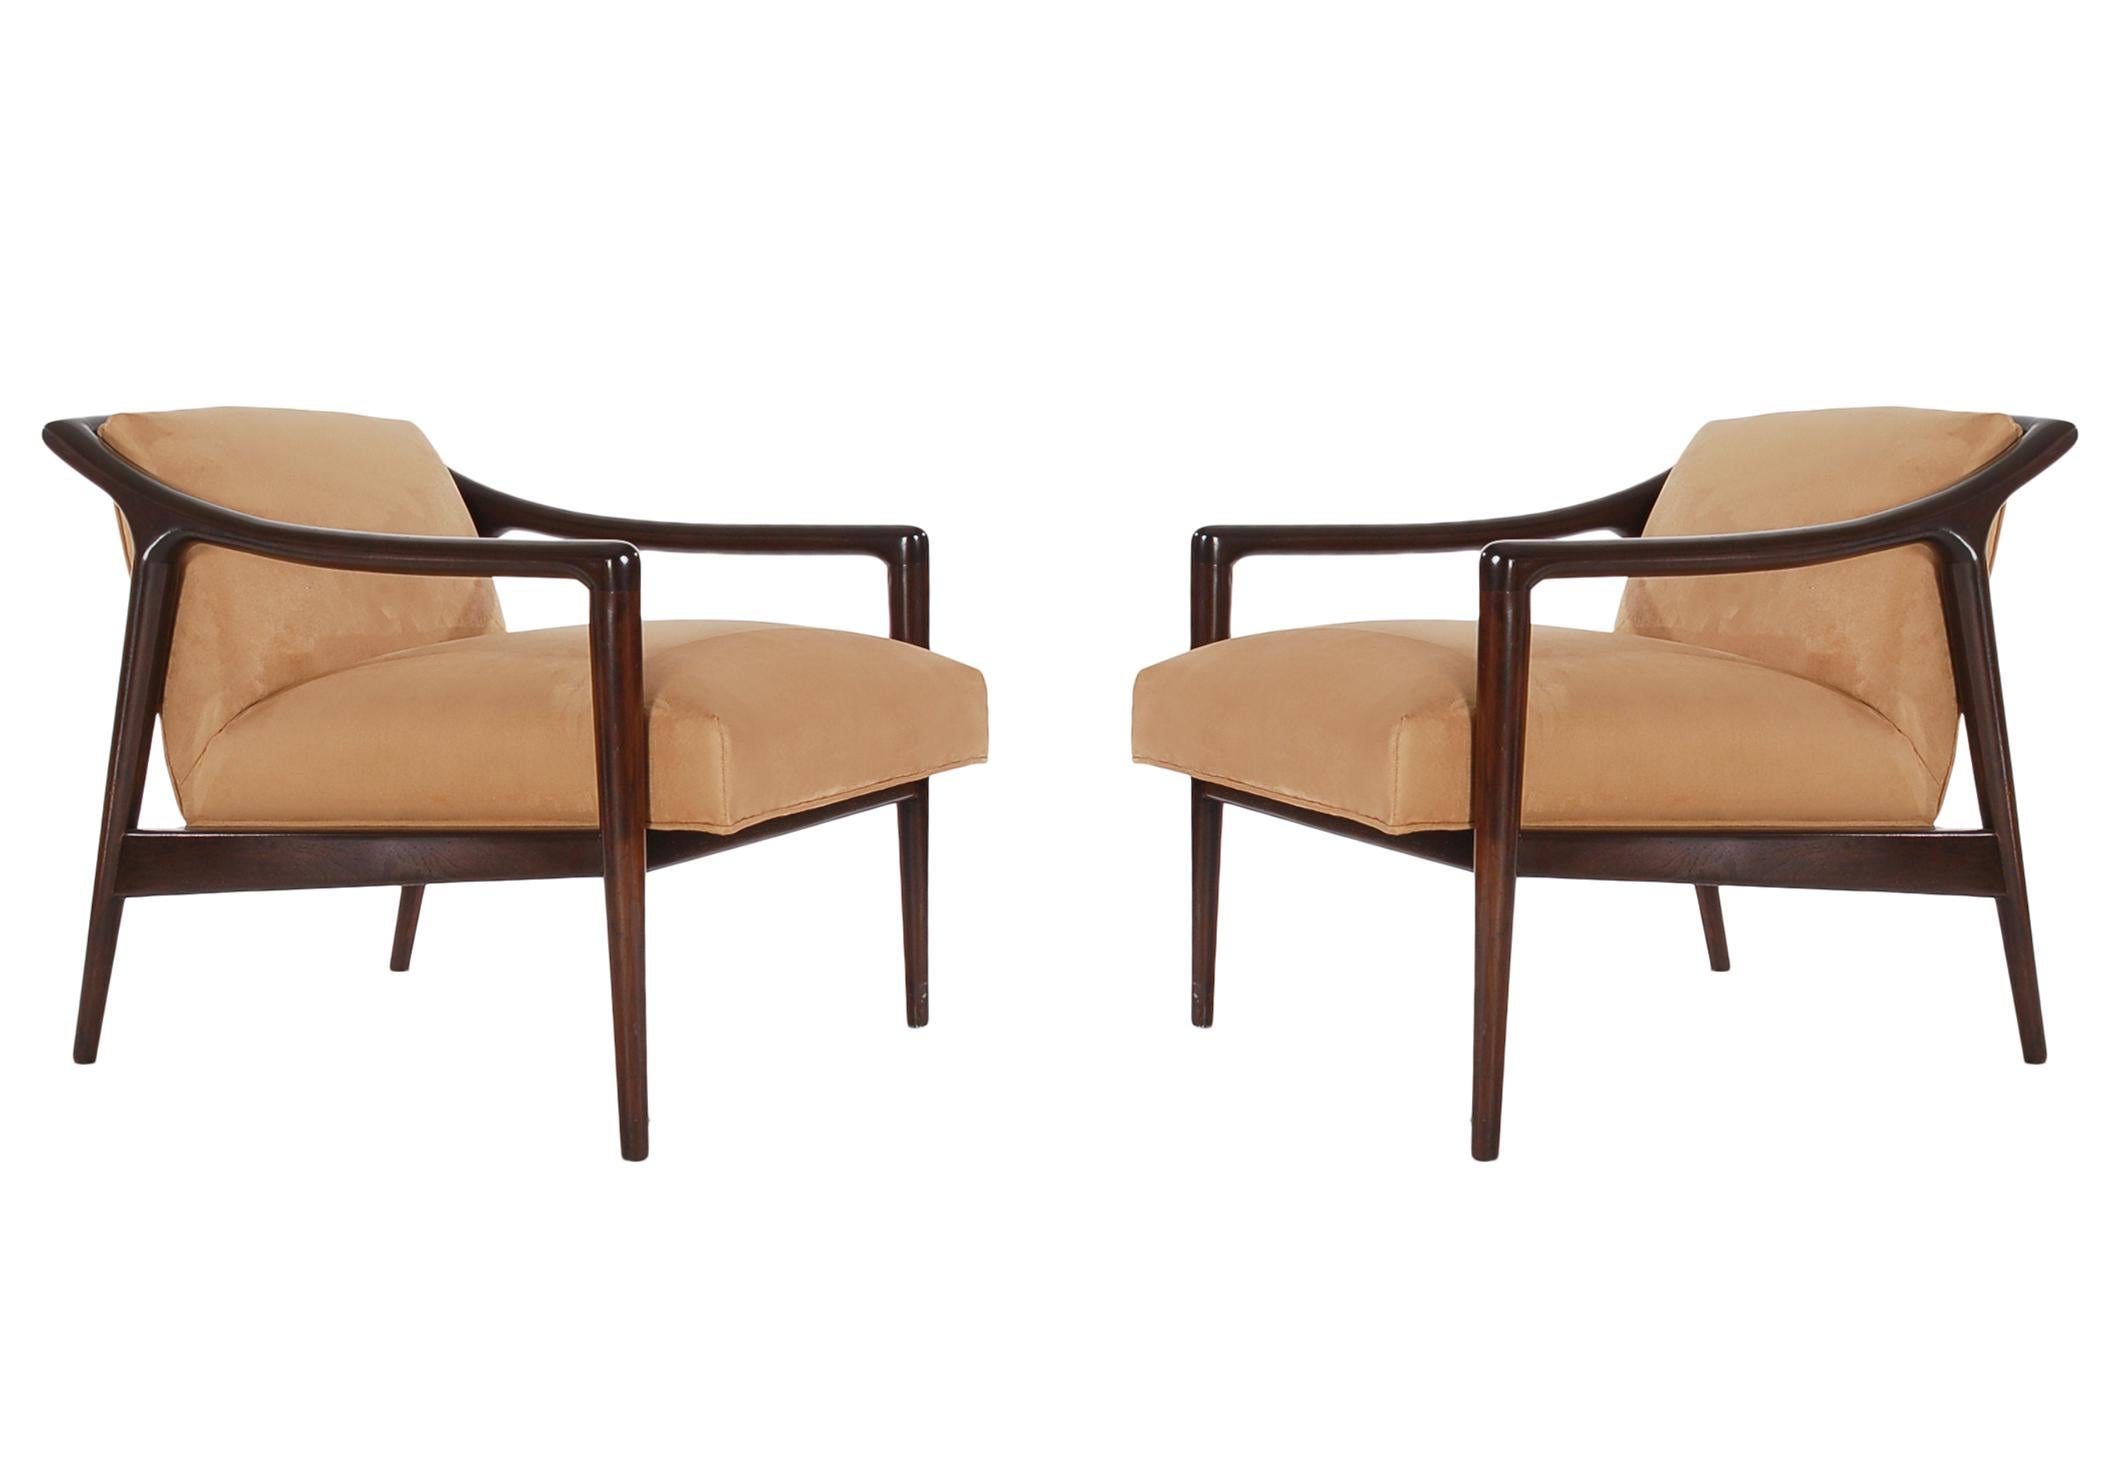 Pair of Midcentury Italian Modern Lounge Chairs in Walnut after Gio Ponti 1